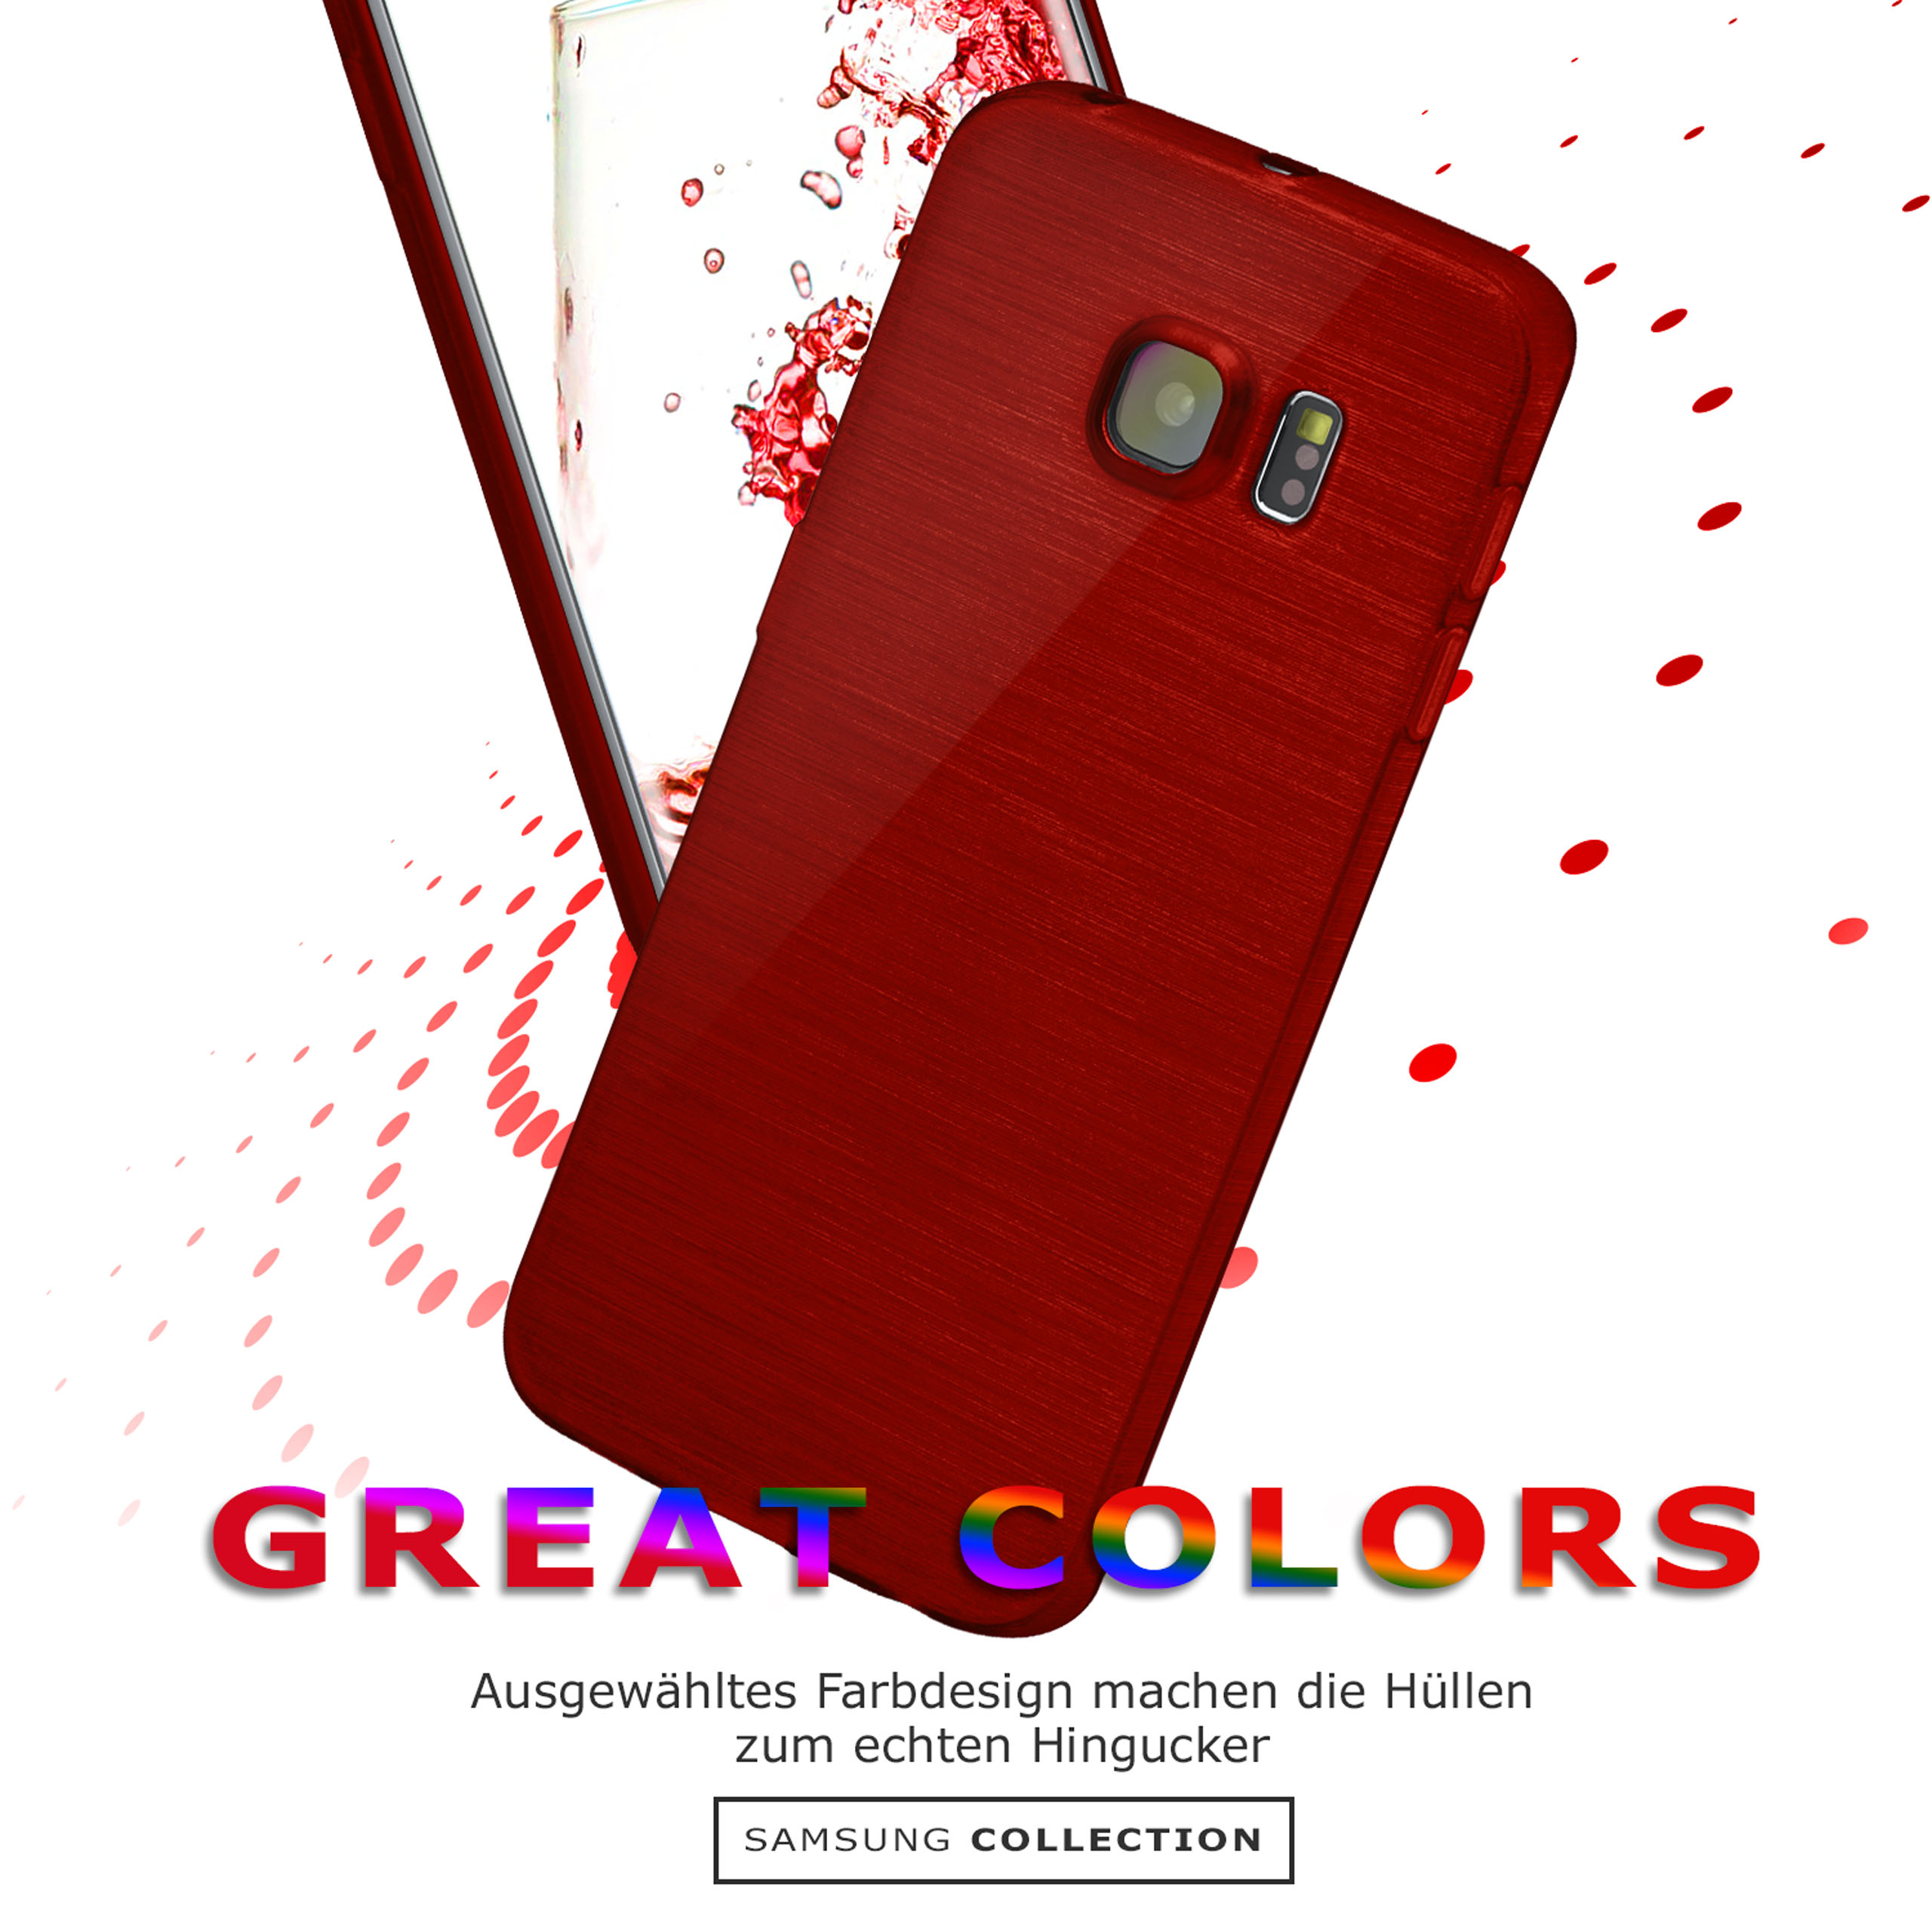 Edge, Galaxy Backcover, Crimson-Red Brushed MOEX Case, Samsung, S6